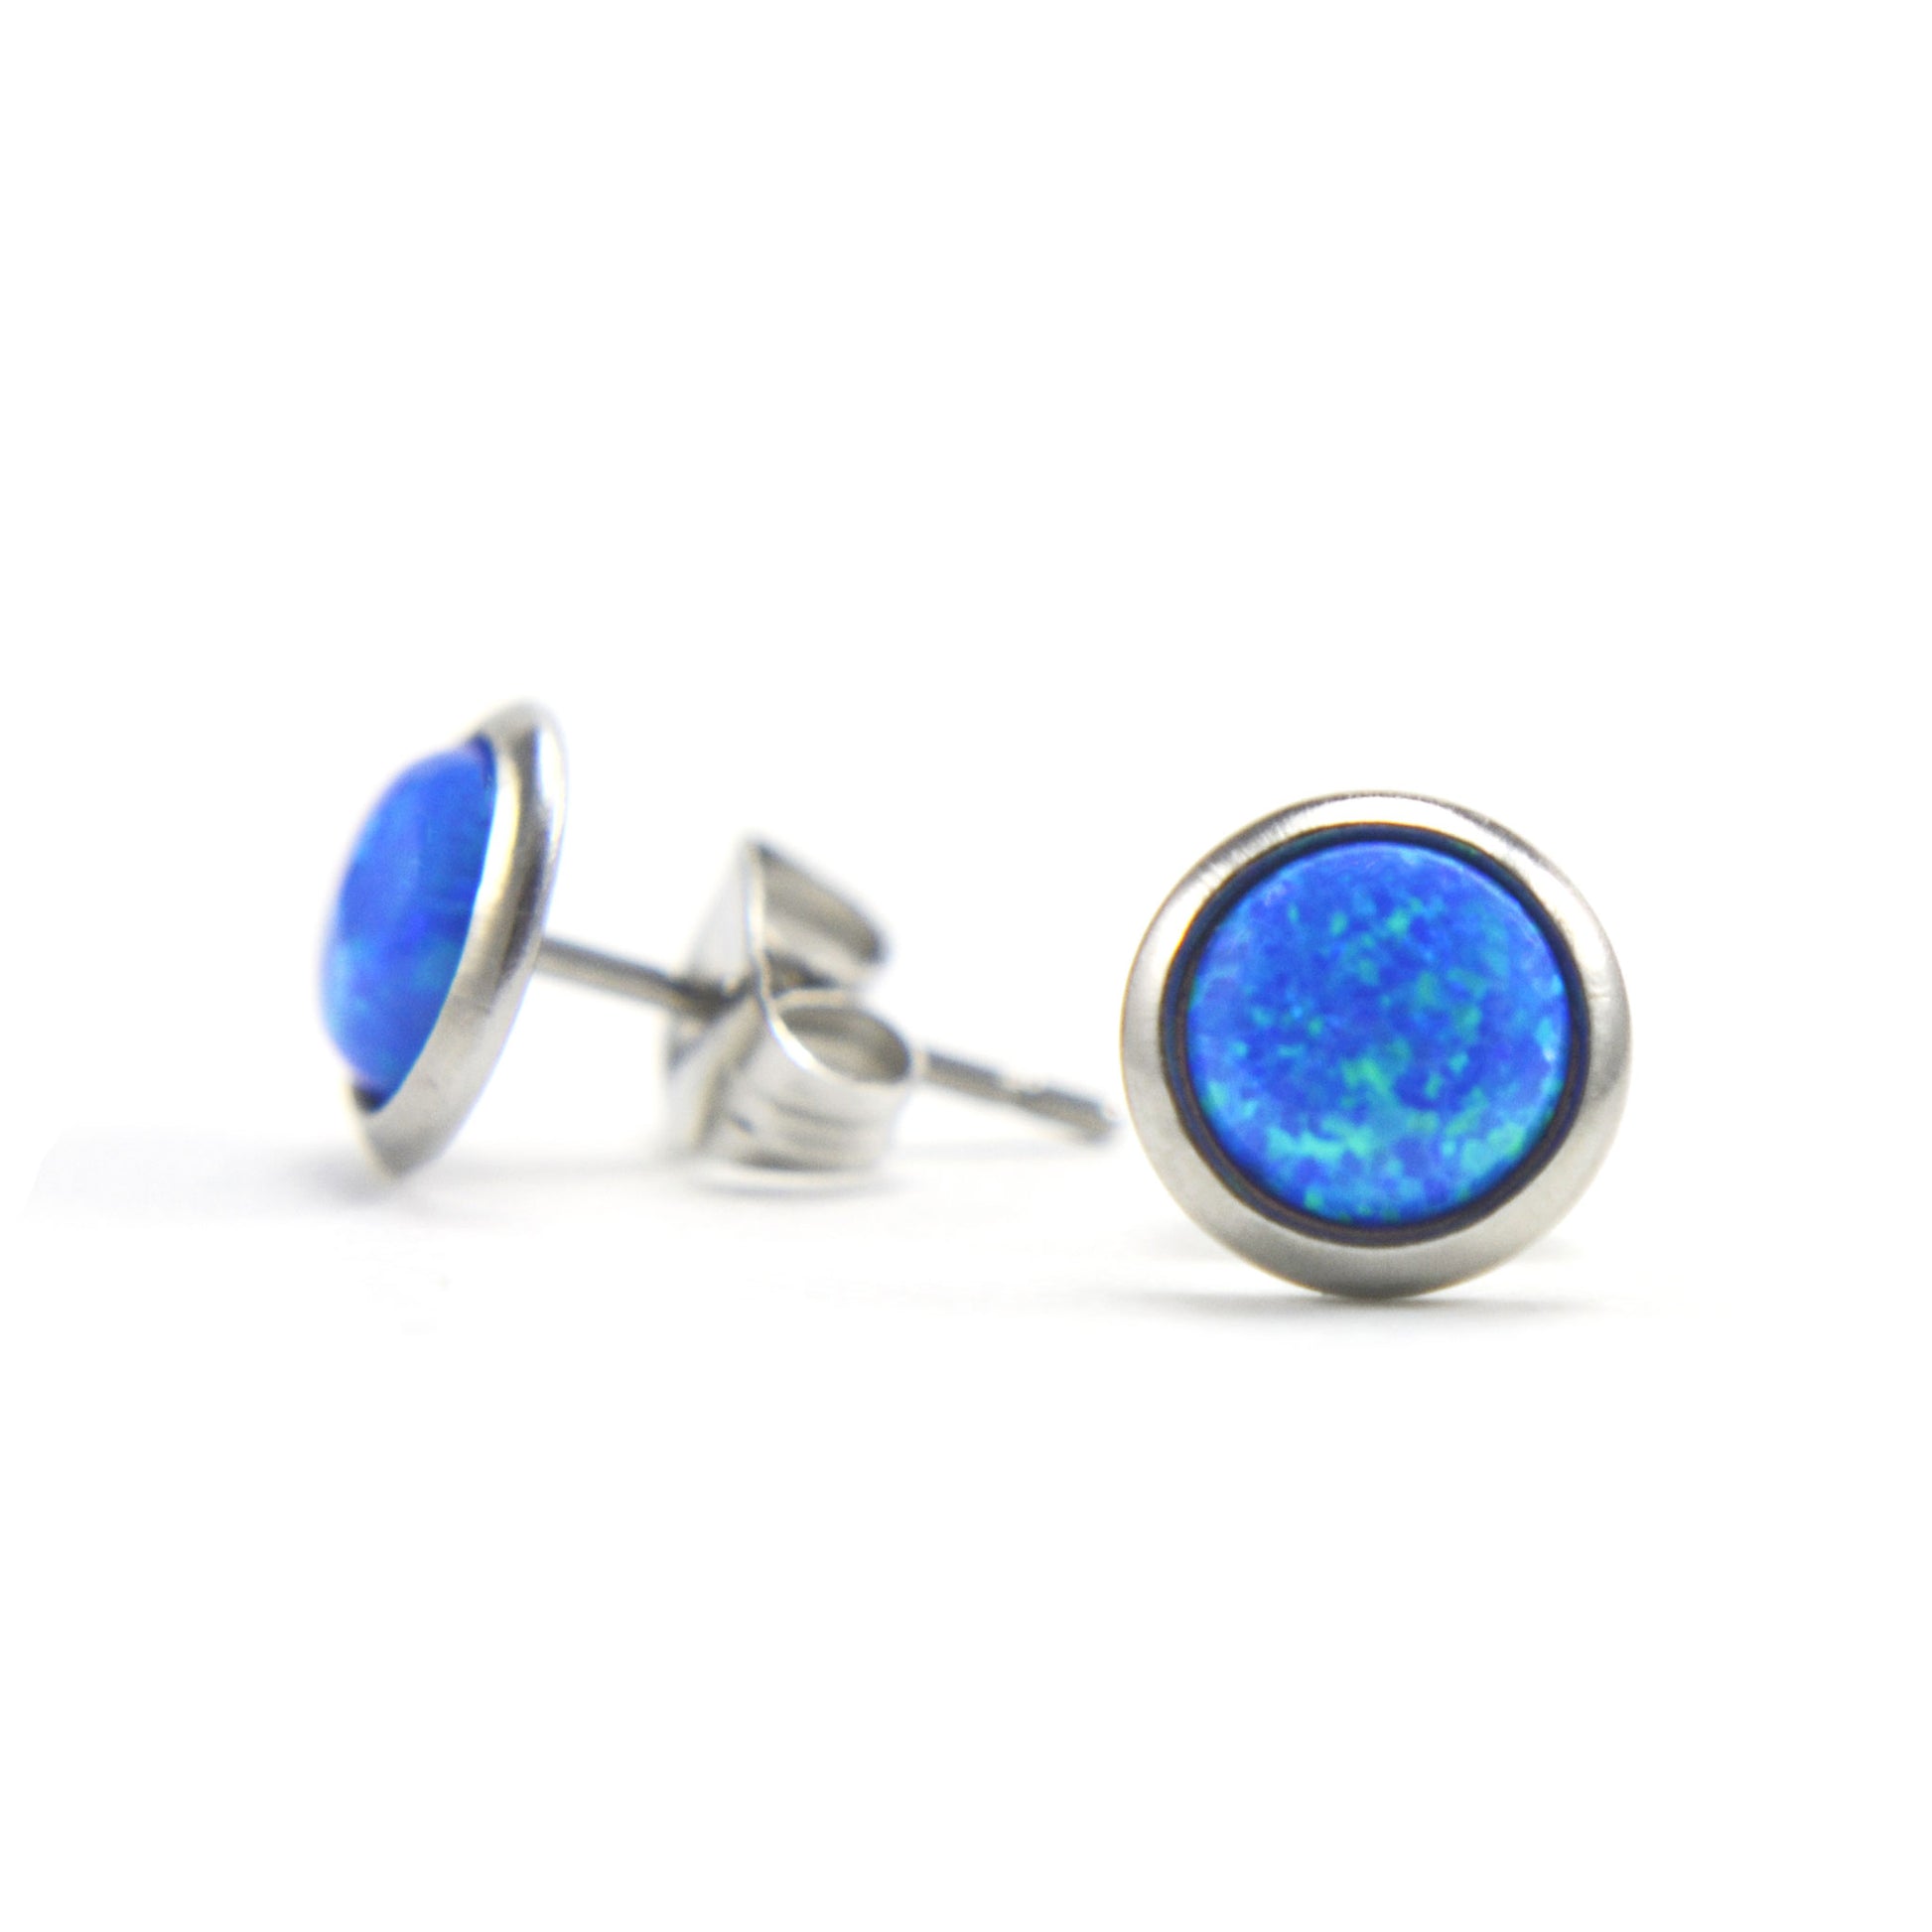 Round blue Opal stud earrings on white background